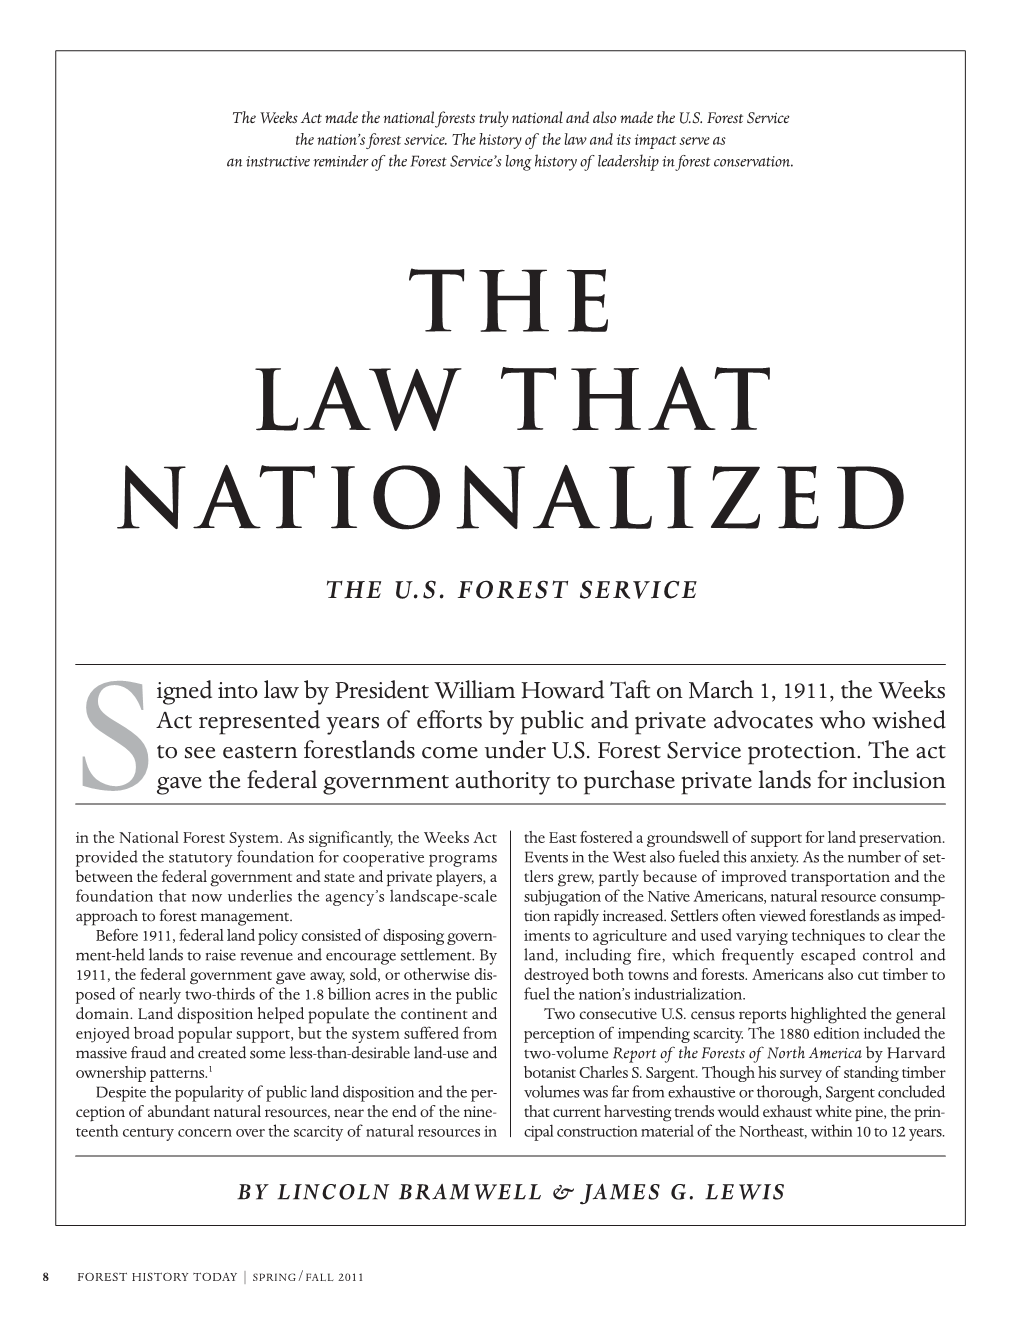 The Law That Nationalized